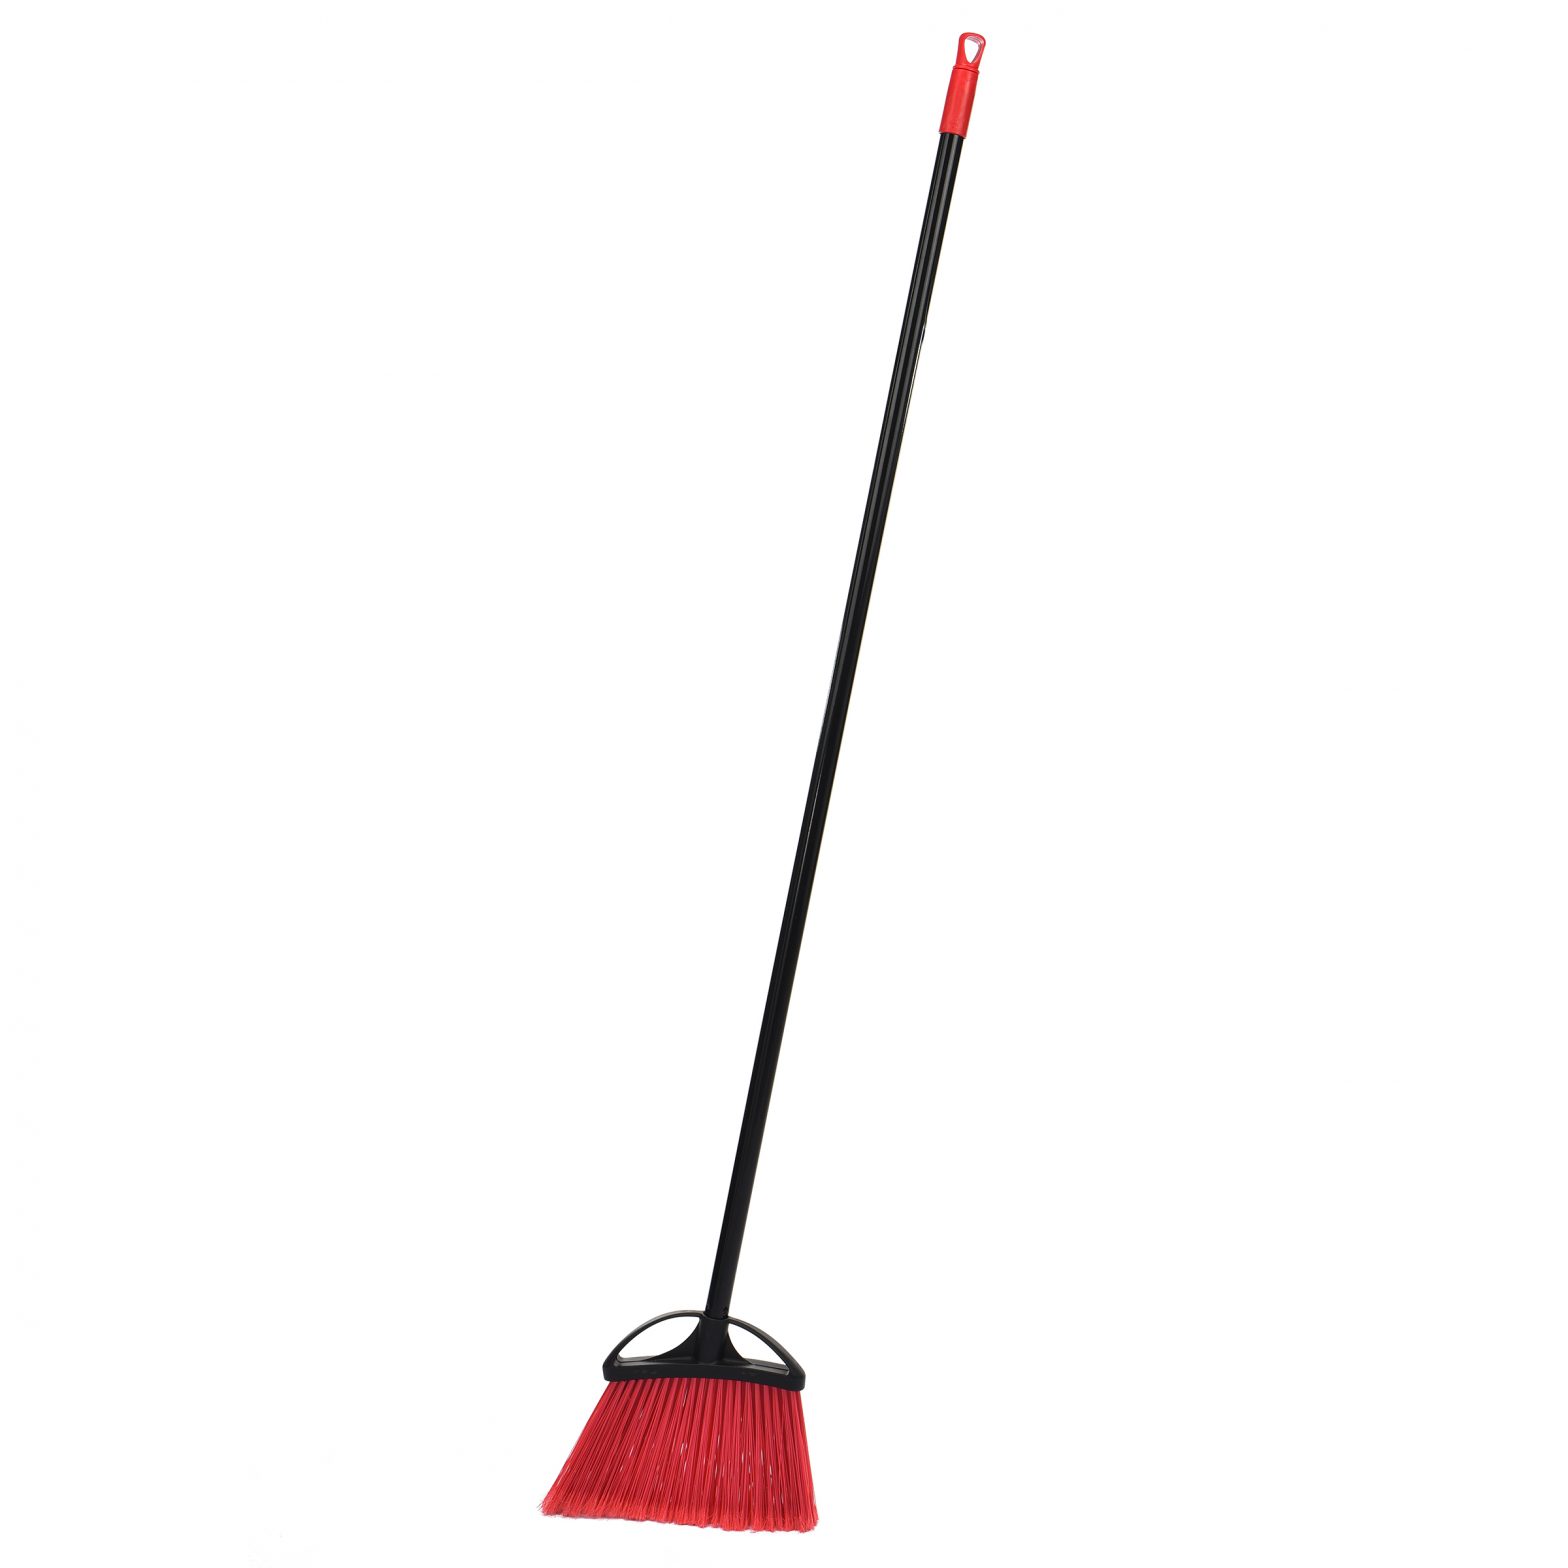 10-INCH SMOOTH SURFACE ANGLE BROOM, PACK OF 3 – Alpine